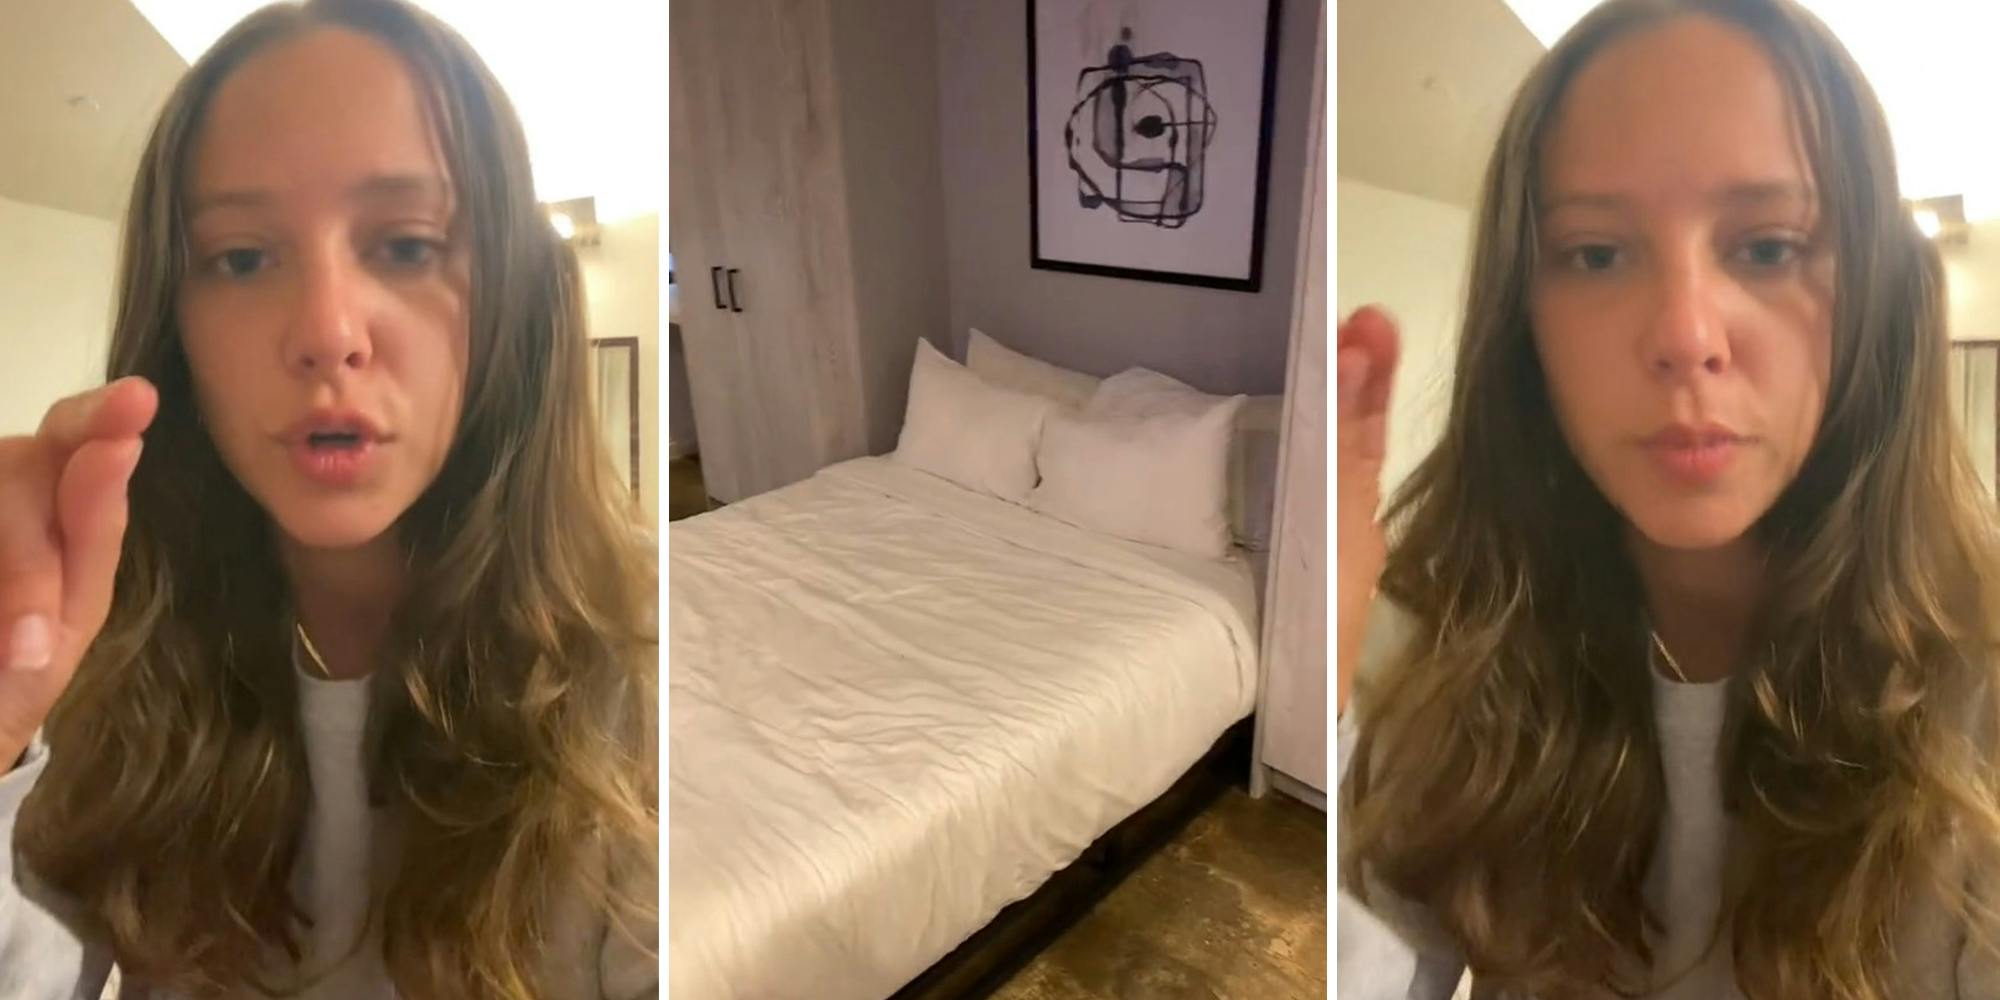 Woman issues warning against Philadelphia hotel after discovering mysterious holes in the wall